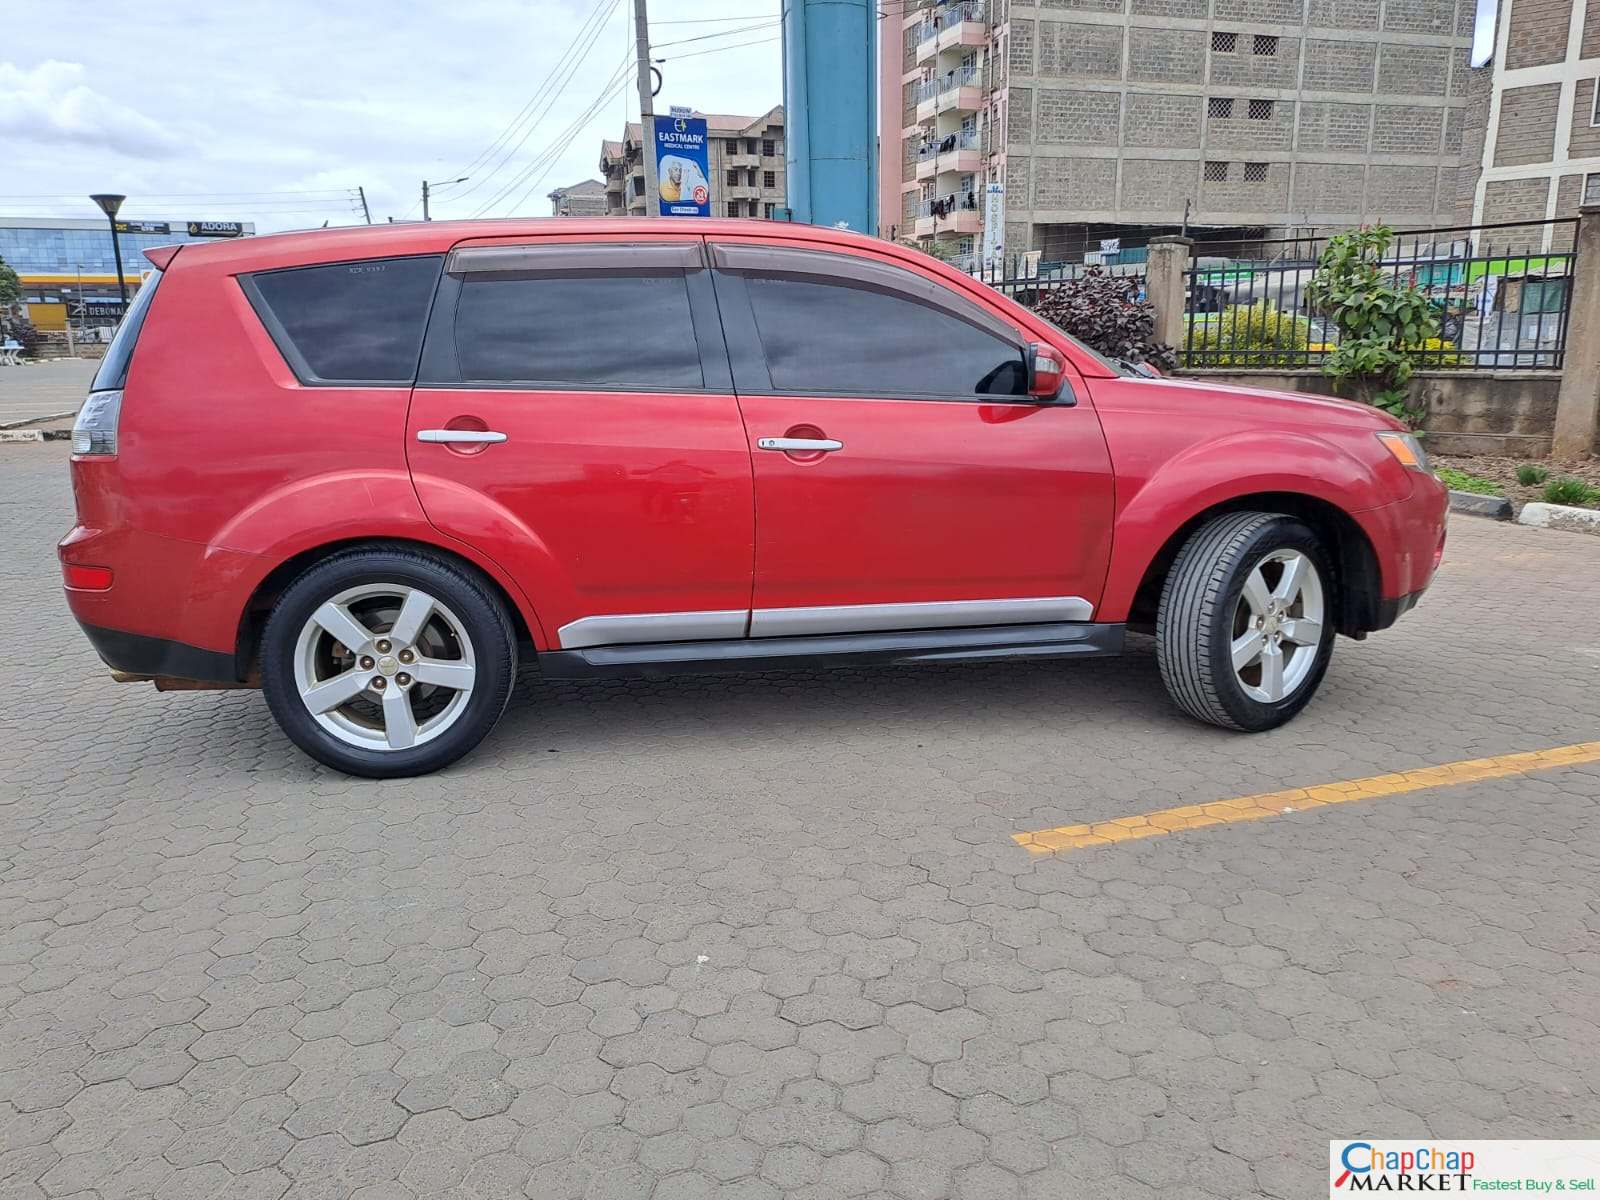 Cars Cars For Sale-Mitsubishi OUTLANDER You Pay 30% Deposit Trade in Ok EXCLUSIVE outlander for sale in kenya hire purchase installments 9